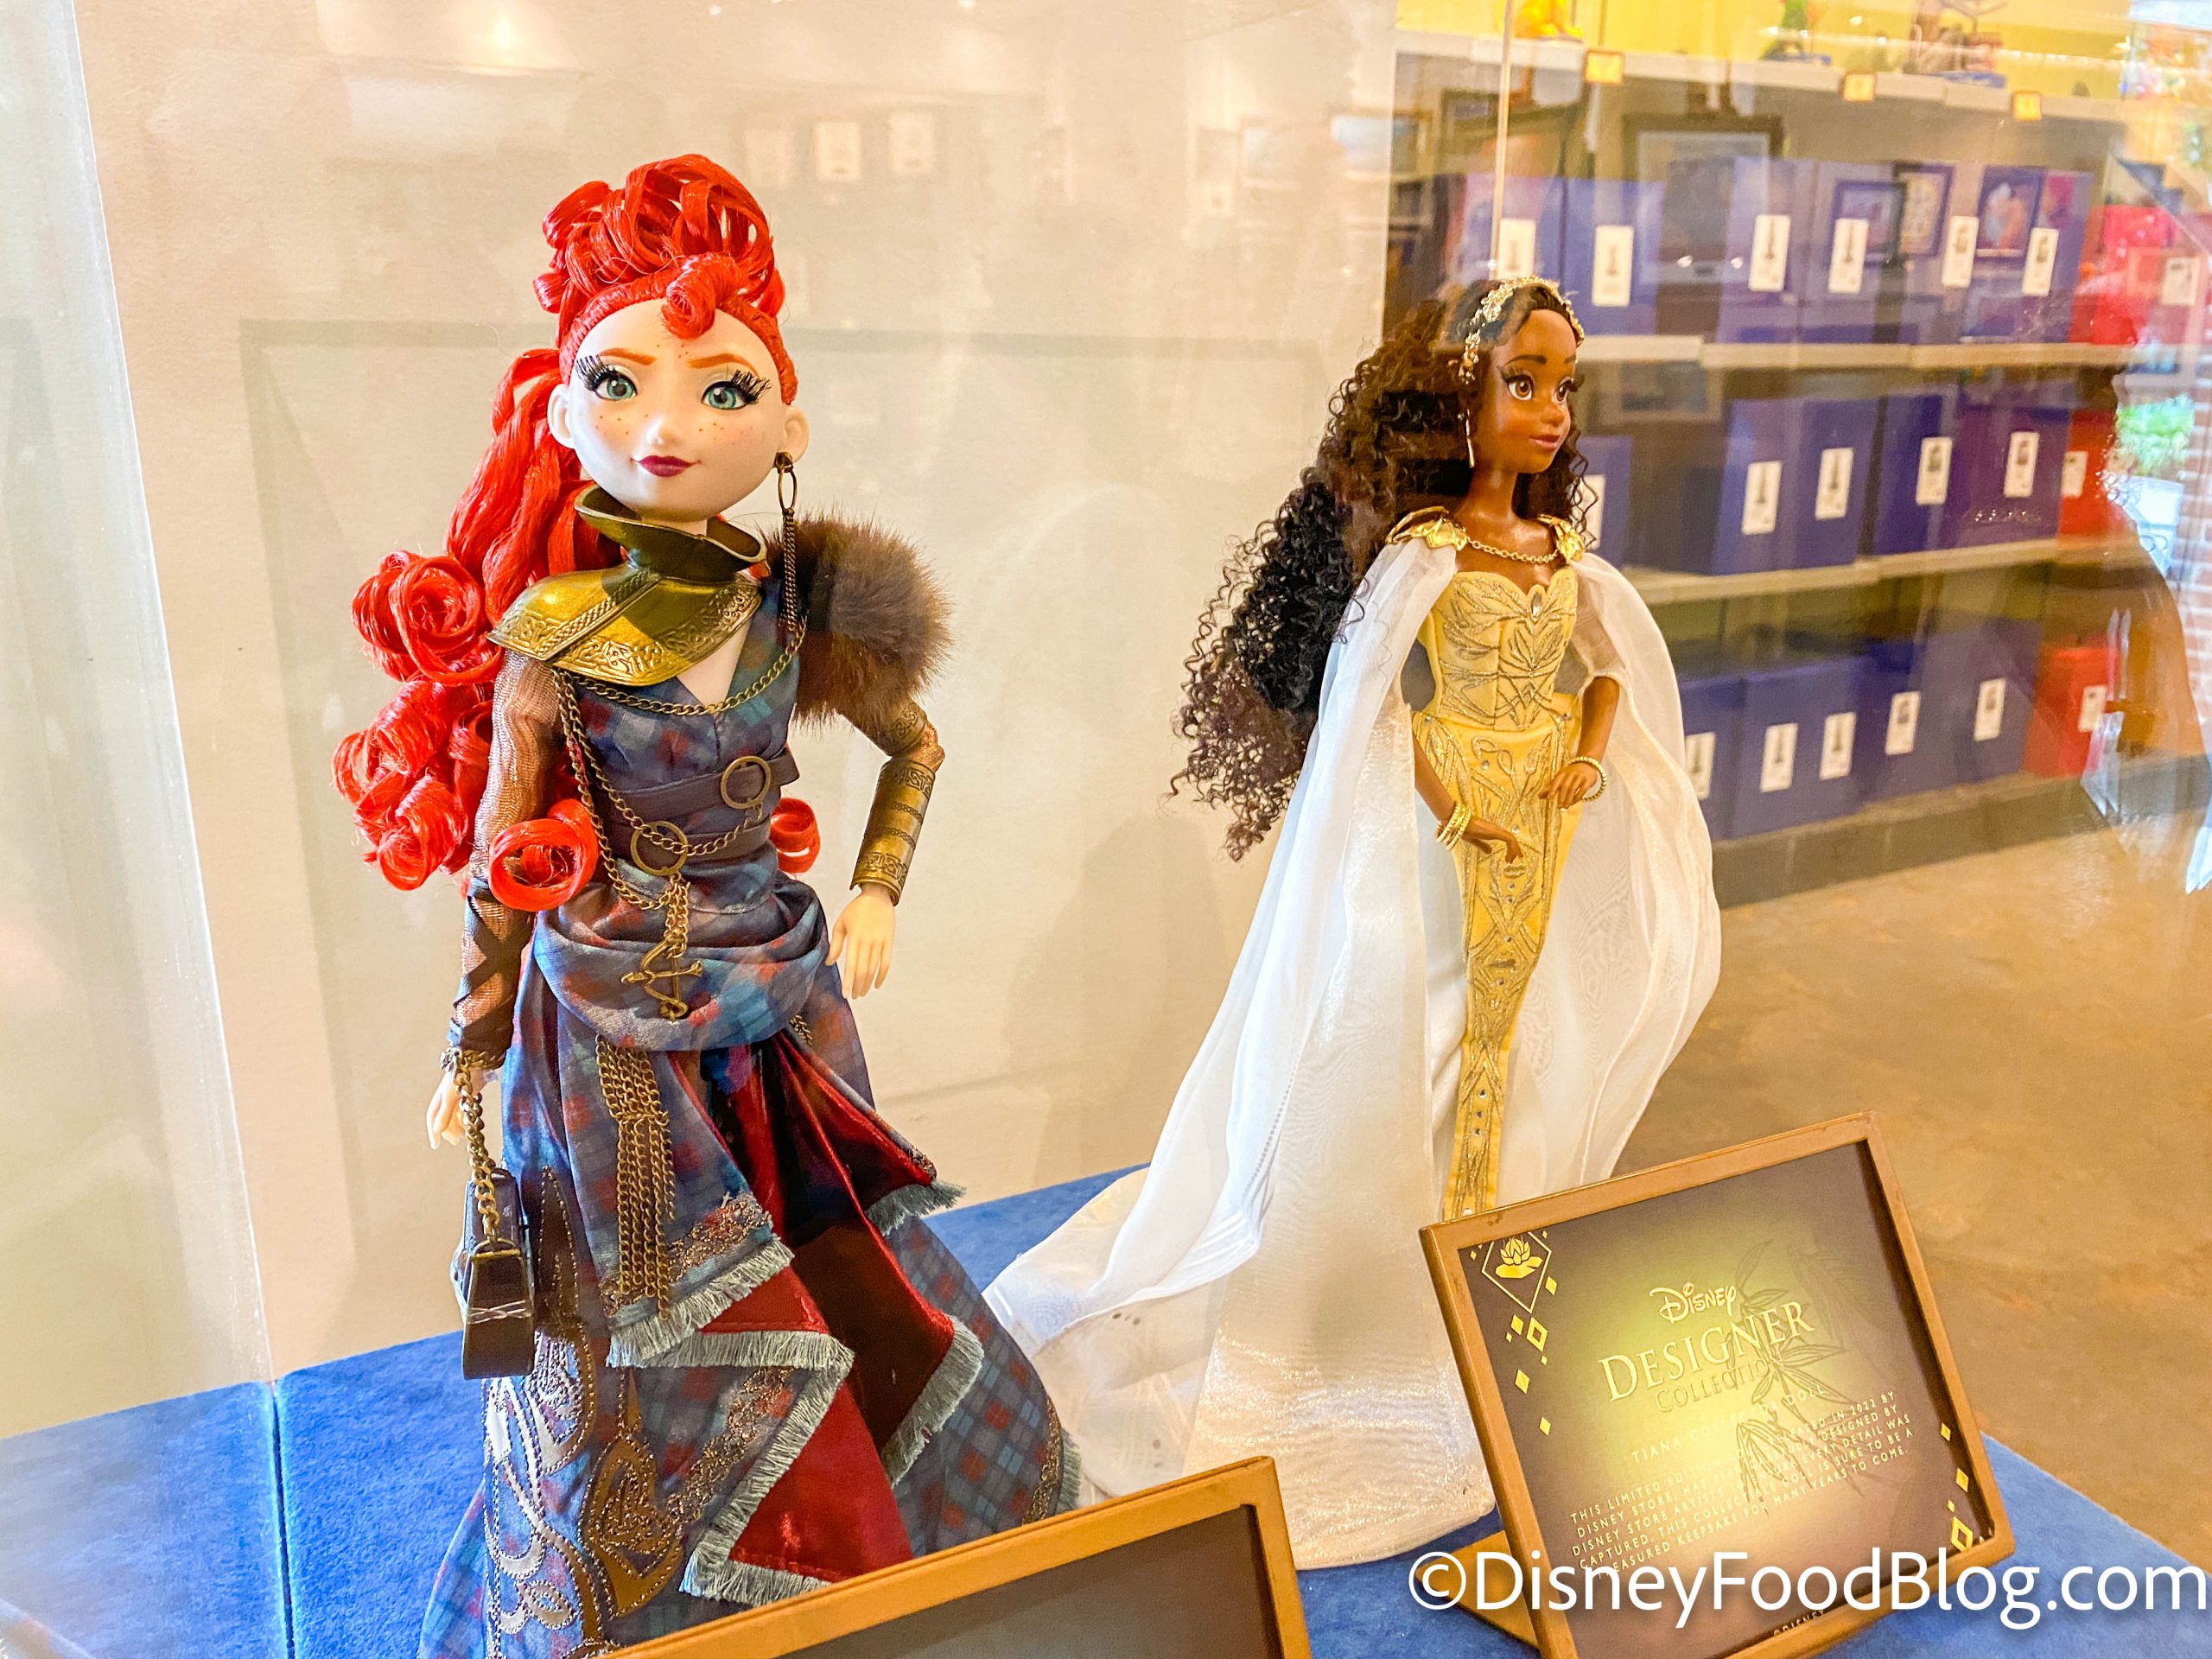 Aurora Disney Designer Collection Doll Now Available on shopDisney